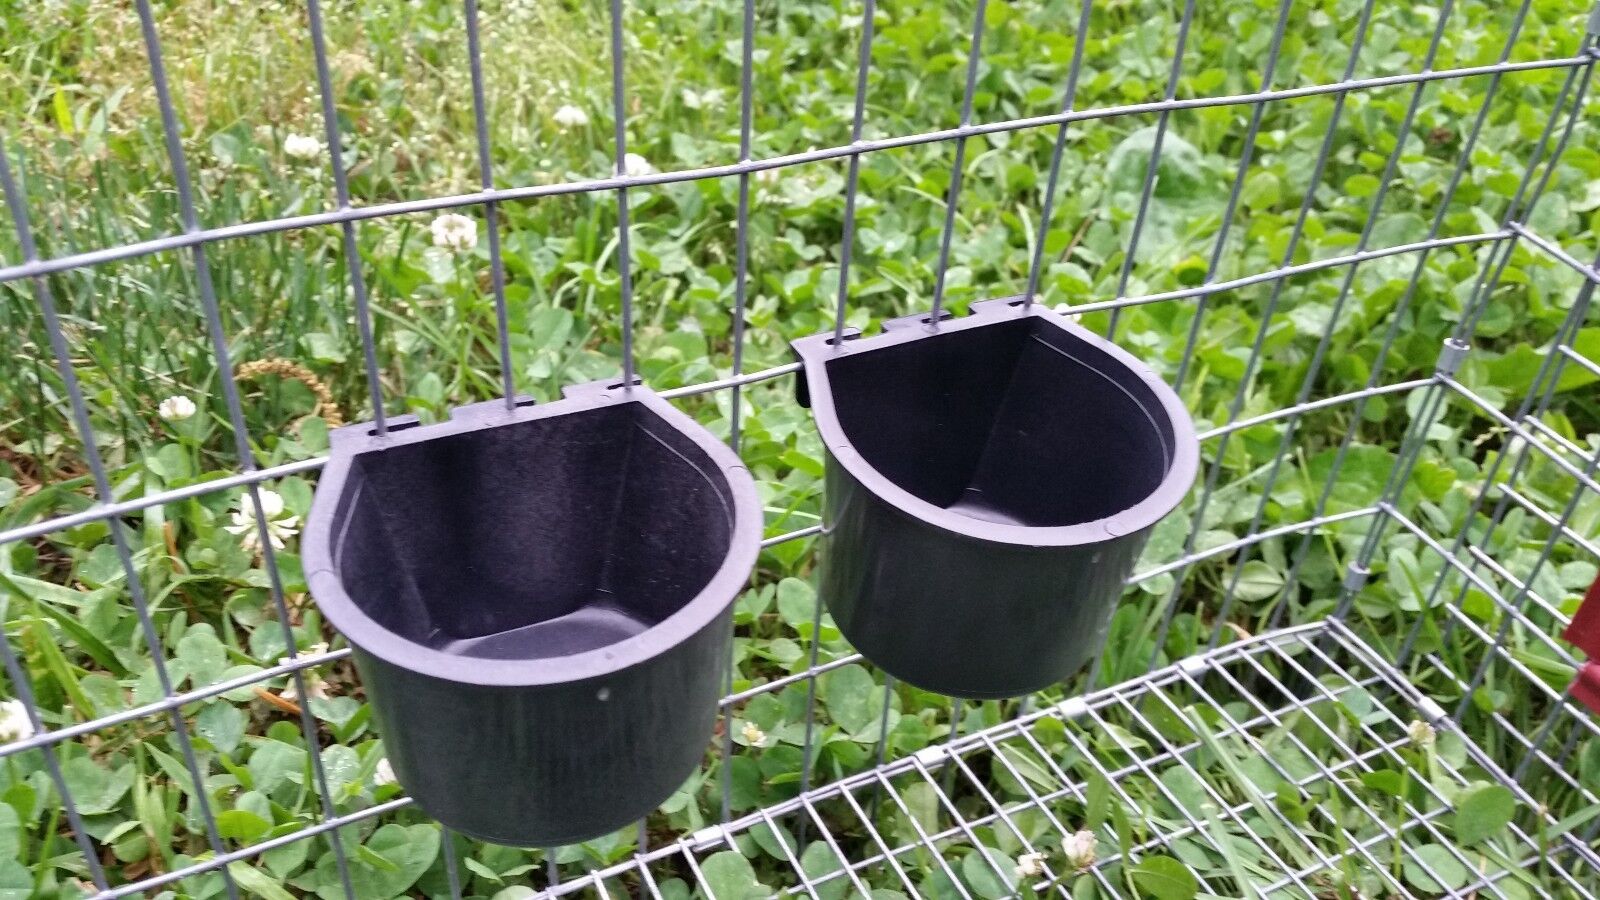 Set of 2 Feeder / Water Cups for Small Animal, Rabbit or Quail Wire Cages.   Game Bird Supply